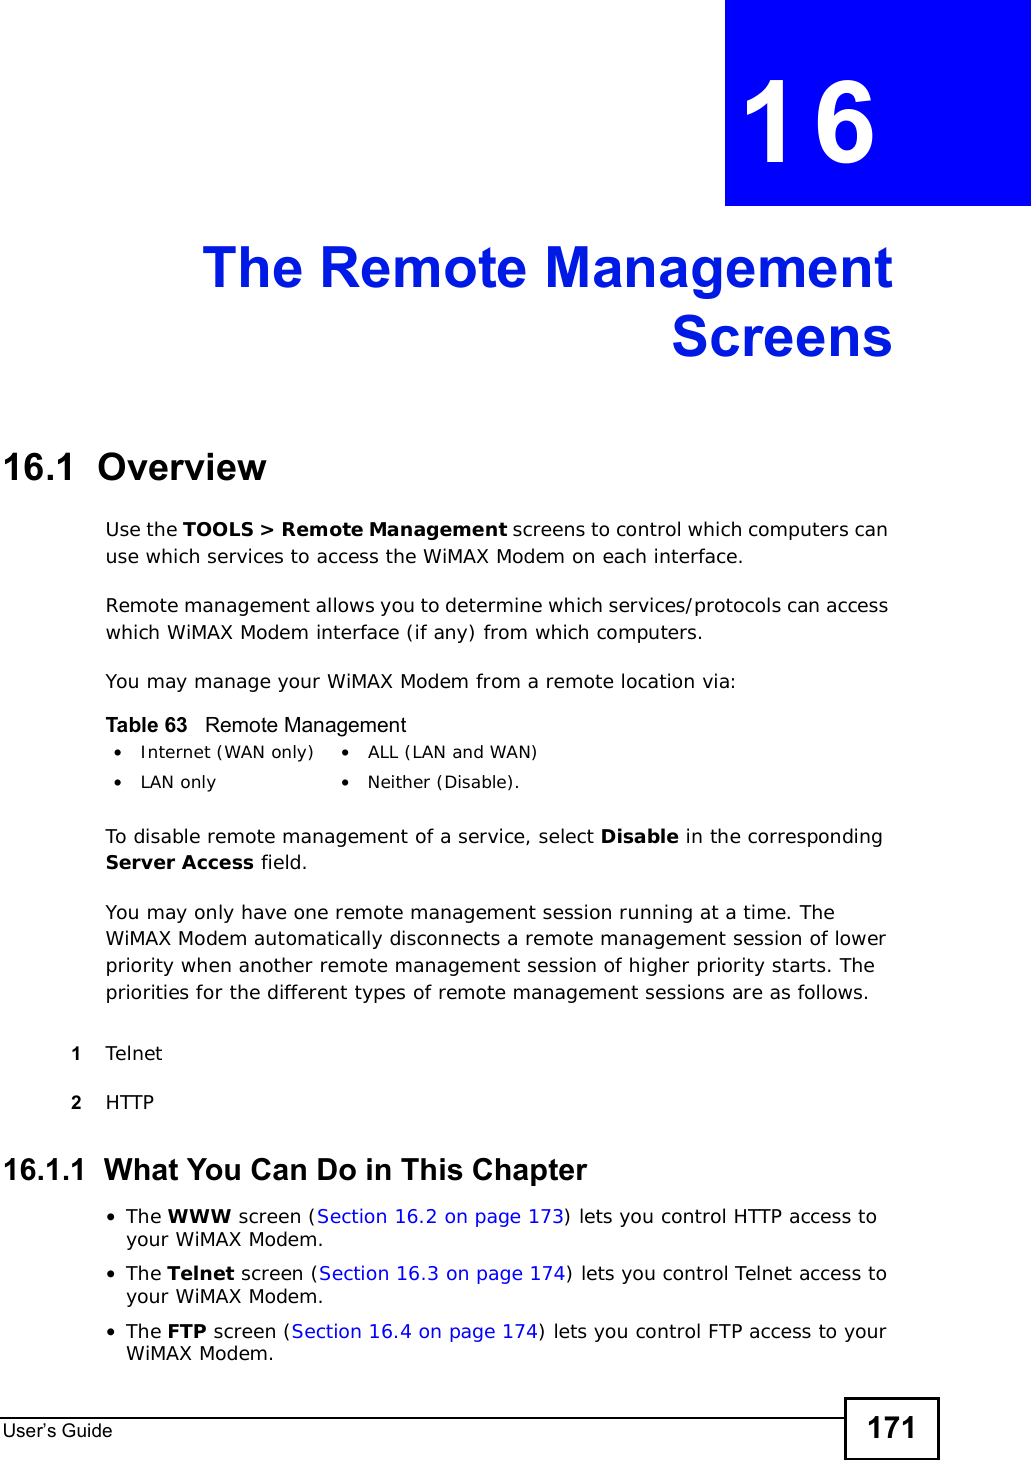 User s Guide 171CHAPTER 16The Remote ManagementScreens16.1  OverviewUse the TOOLS &gt; Remote Management screens to control which computers can use which services to access the WiMAX Modem on each interface.Remote management allows you to determine which services/protocols can access which WiMAX Modem interface (if any) from which computers.You may manage your WiMAX Modem from a remote location via:To disable remote management of a service, select Disable in the corresponding Server Access field.You may only have one remote management session running at a time. The WiMAX Modem automatically disconnects a remote management session of lower priority when another remote management session of higher priority starts. The priorities for the different types of remote management sessions are as follows.1Telnet2HTTP16.1.1  What You Can Do in This Chapter•The WWW screen (Section 16.2 on page 173) lets you control HTTP access to your WiMAX Modem.•The Telnet screen (Section 16.3 on page 174) lets you control Telnet access to your WiMAX Modem.•The FTP screen (Section 16.4 on page 174) lets you control FTP access to your WiMAX Modem.Table 63   Remote Management•Internet (WAN only) •ALL (LAN and WAN)•LAN only •Neither (Disable).